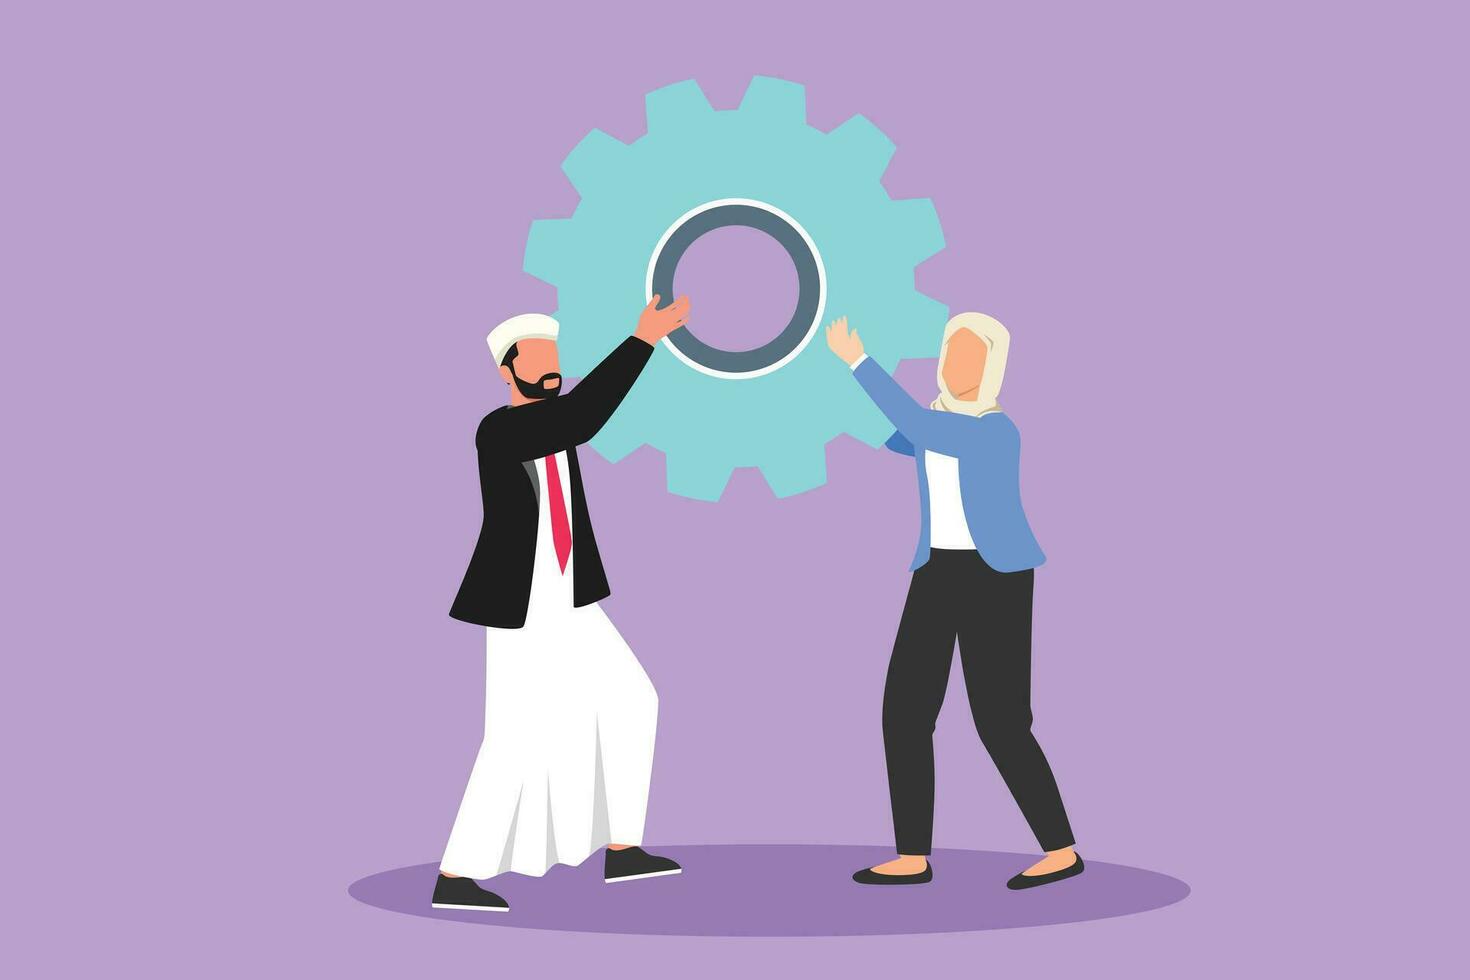 Graphic flat design drawing collaboration project. Arabian man and woman lifting gears. People working with cogs. Professional teamwork process cooperation concept. Cartoon style vector illustration